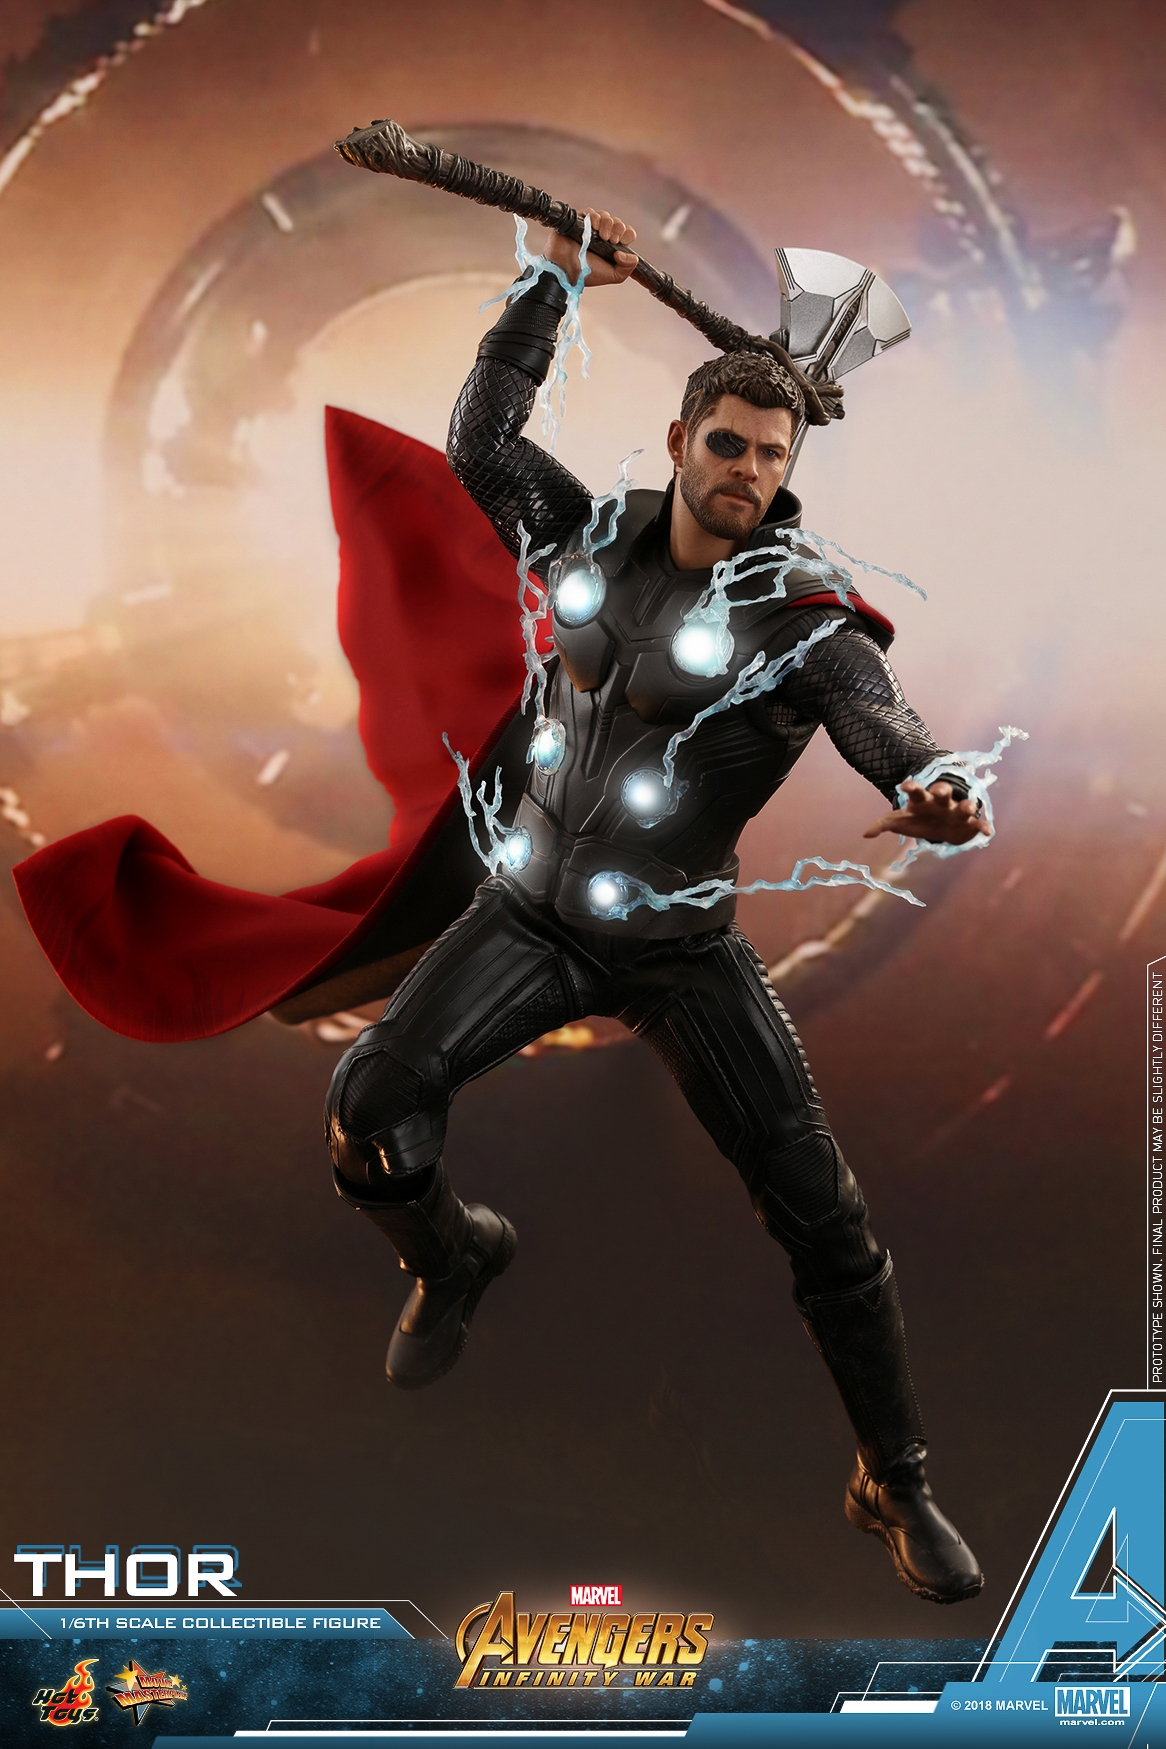 Hot-Toys-MMS474-Avengers-Infinity-War-Thor-Collectible-Figure-017.jpg